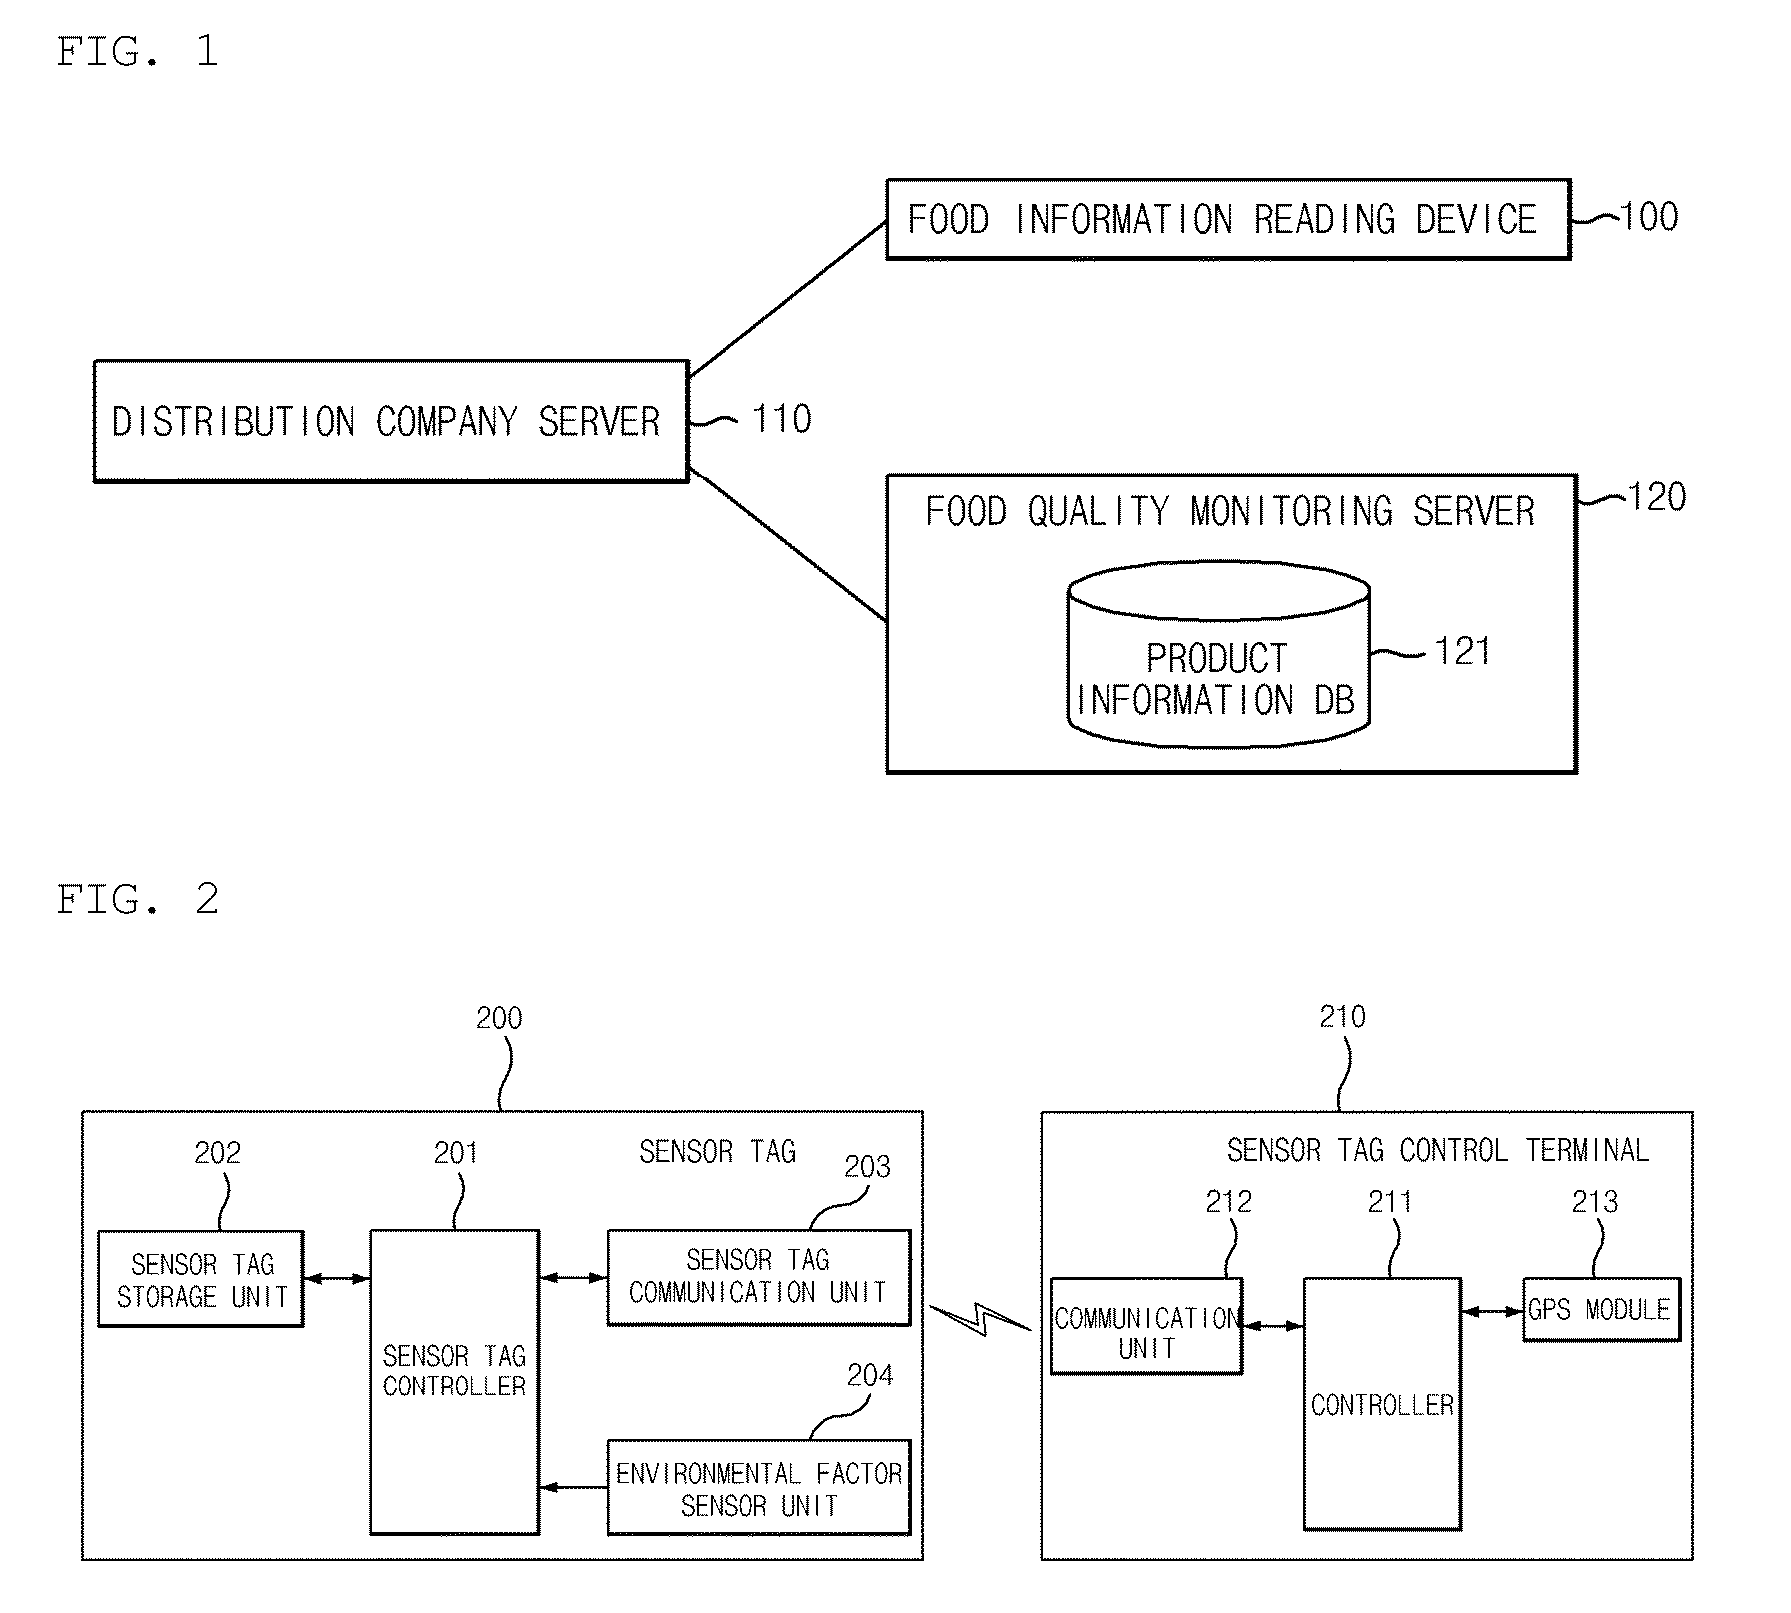 Method and system for monitoring quality of food